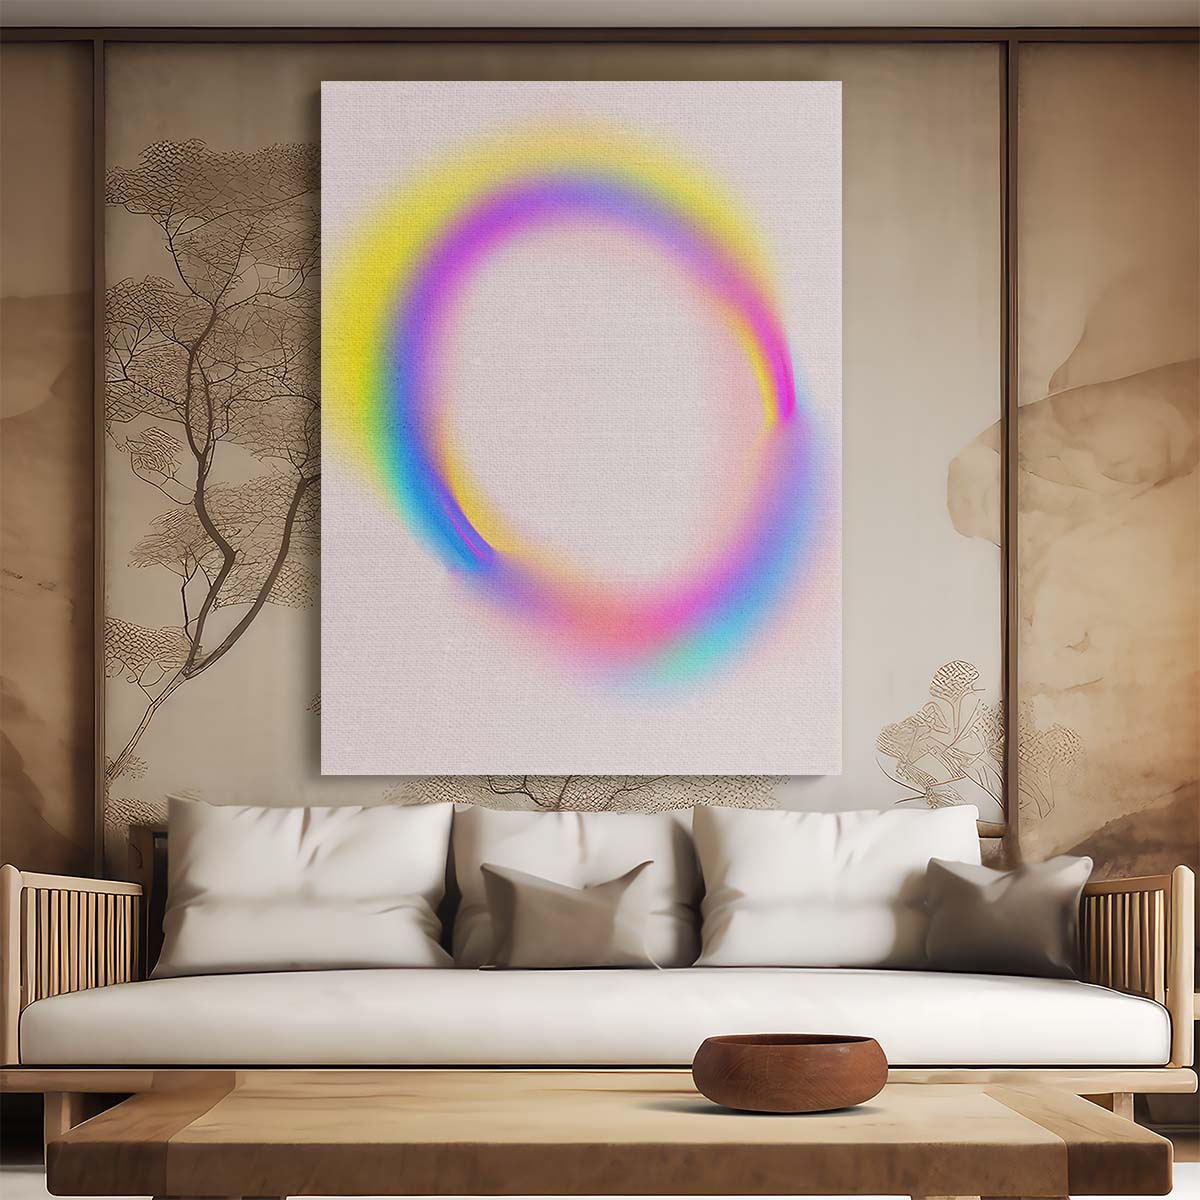 Abstract Geometric Rainbow Neon Circle Illustration by Treechild by Luxuriance Designs, made in USA